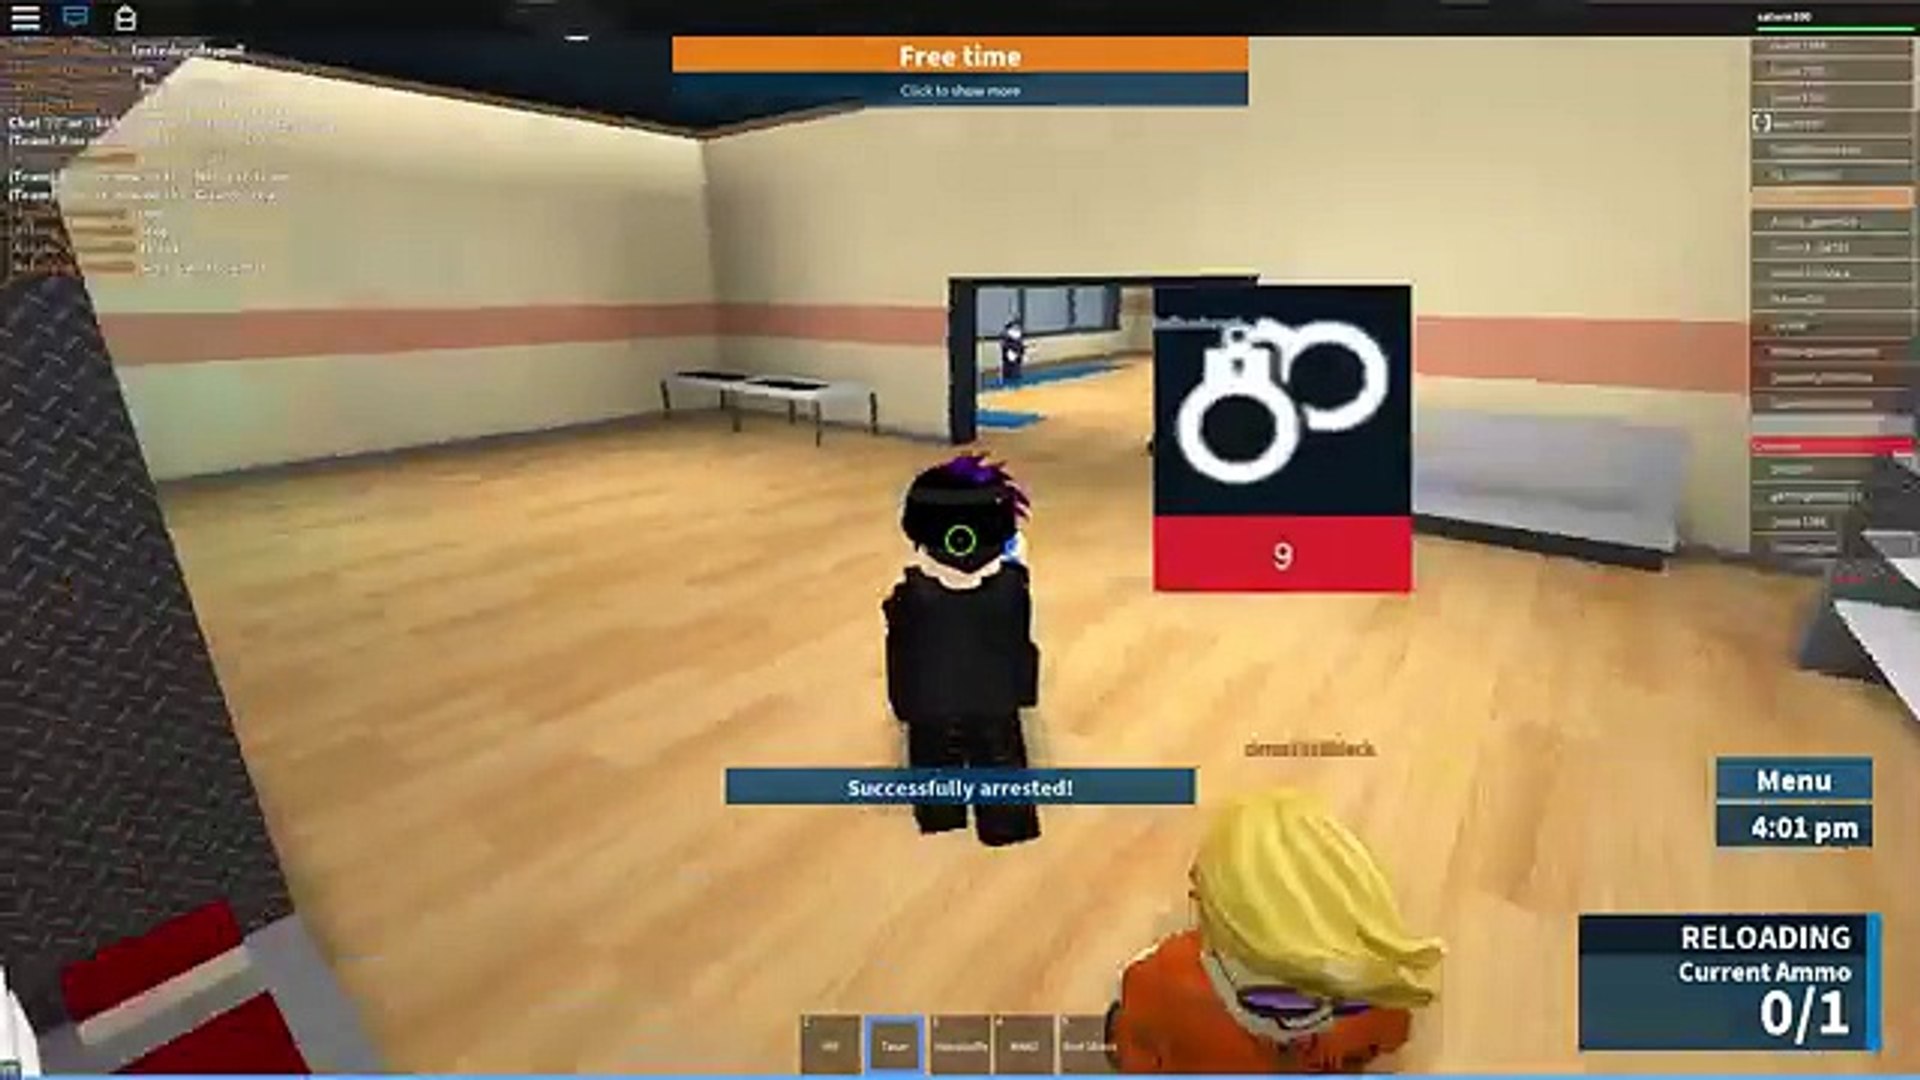 Roblox Prison Life V2 0 Buying The Swat Gear Roblox Fun Video Dailymotion - prison life v2 0 roblox